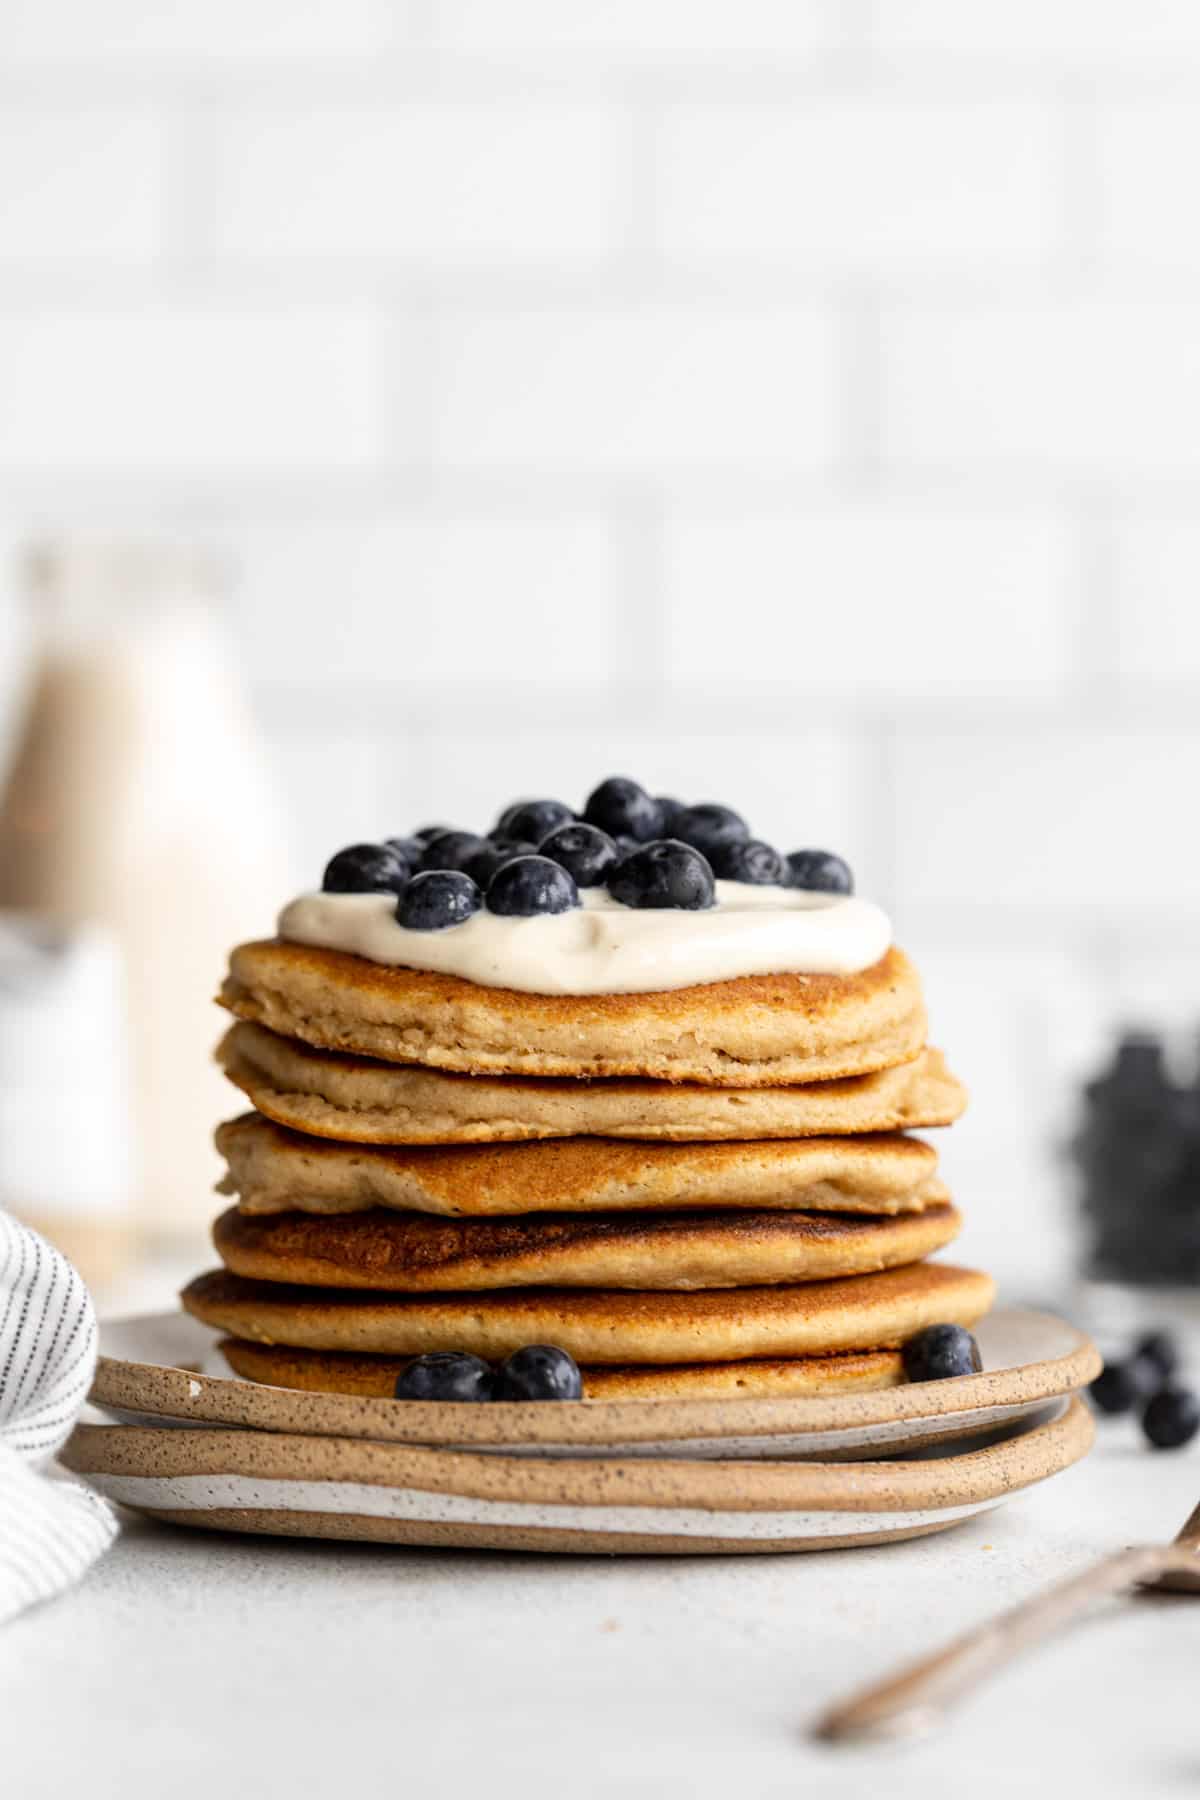 almond flour pancakes on a plate with berries